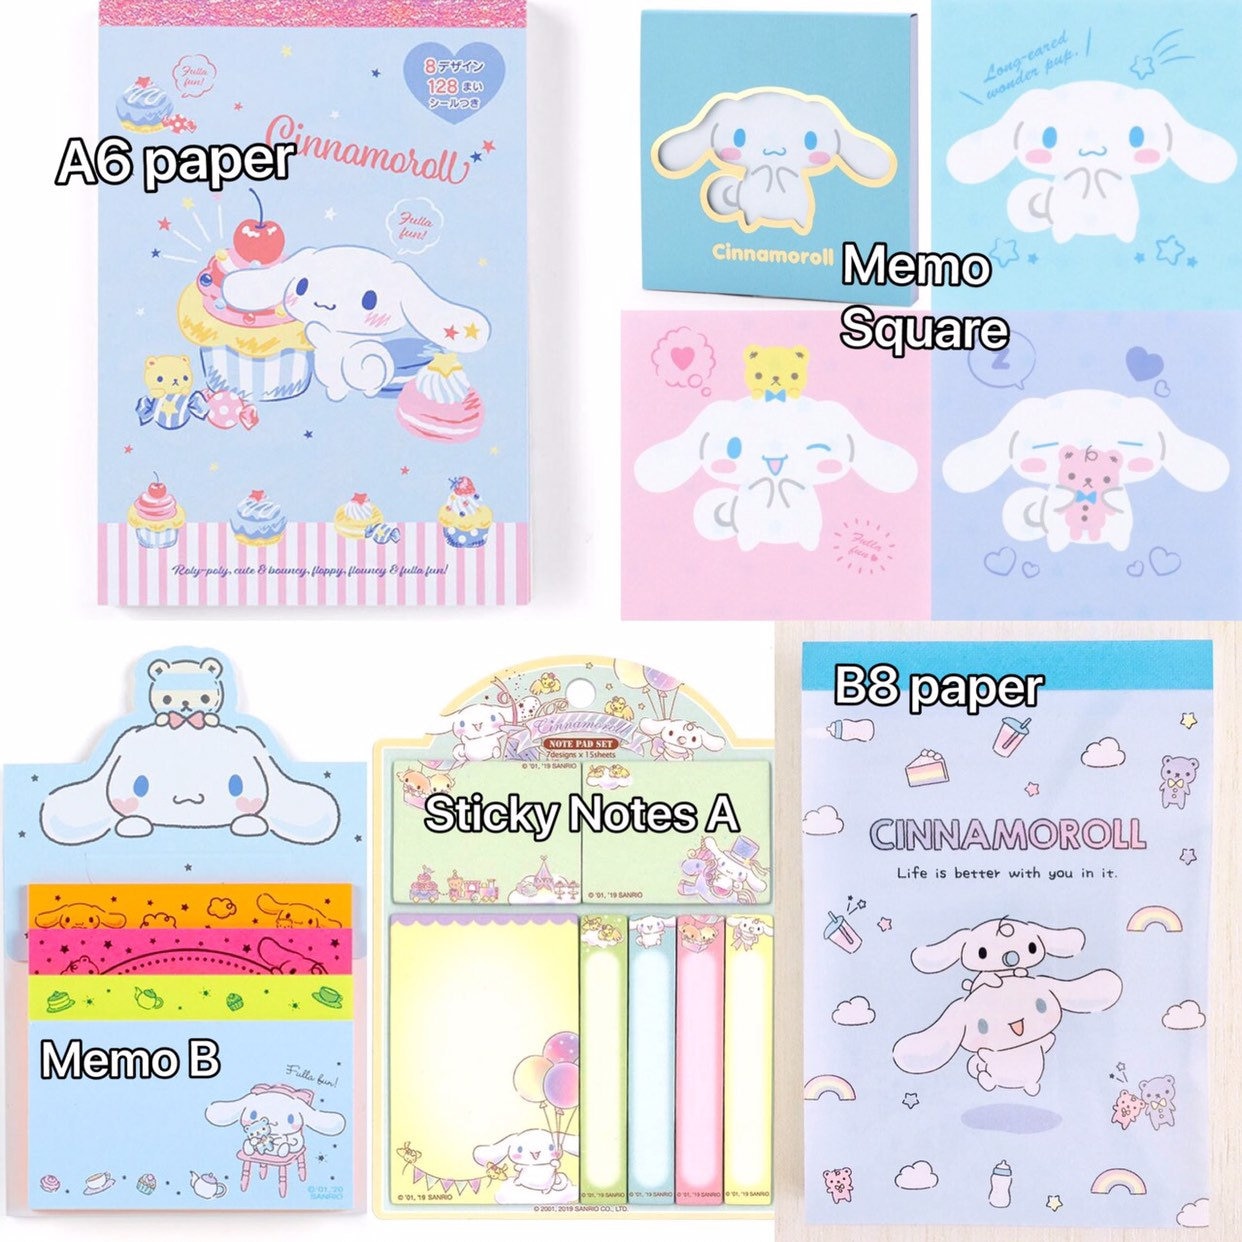 Japan Notebook Paper Notepad Cinnamoroll Sticky Notes Memo A6 | Etsy